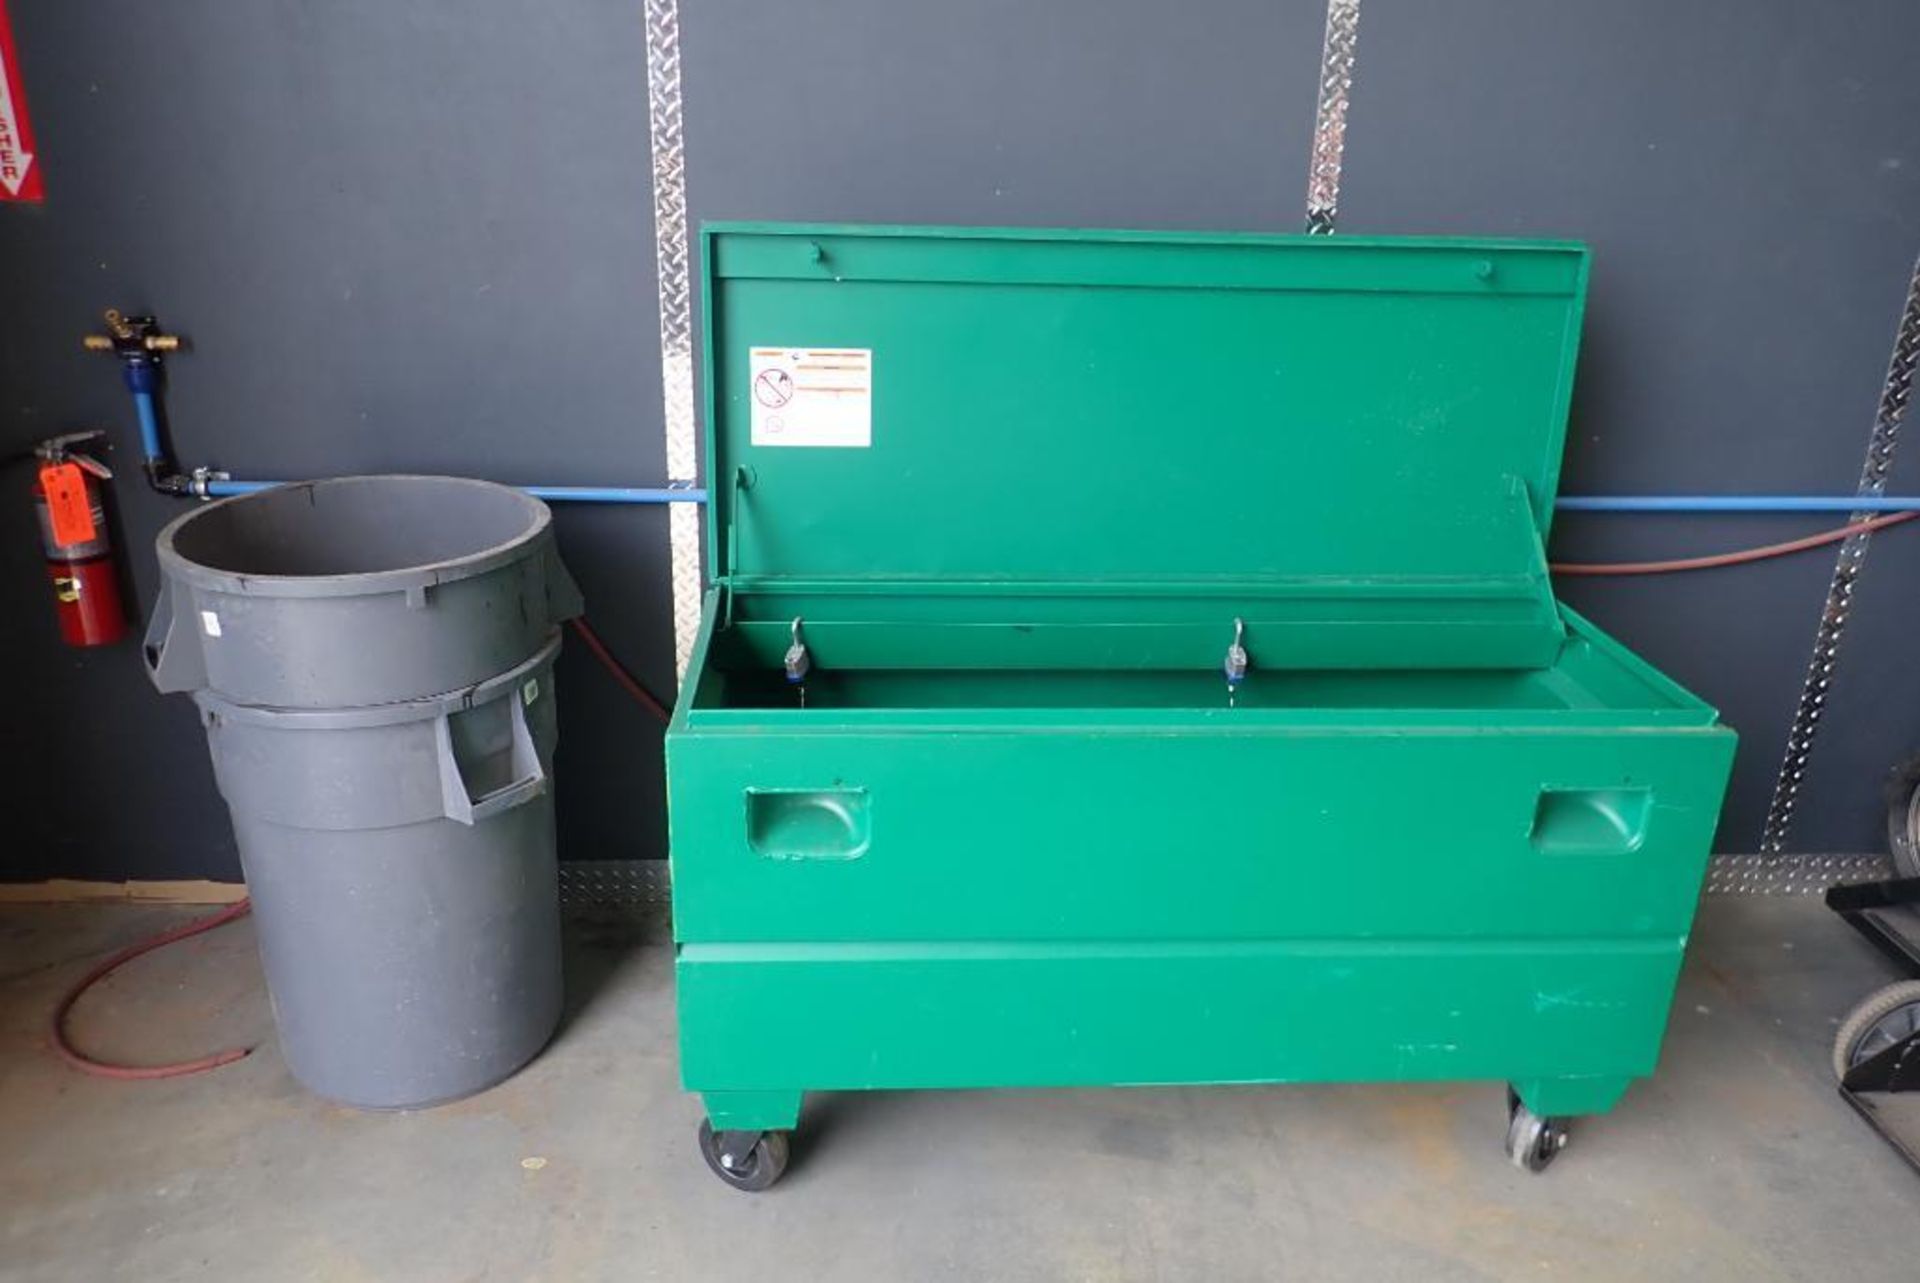 Lot of Mobile 60"x24"x24" Job Box and (2) Rubbermaid Garbage Bins. - Image 2 of 3